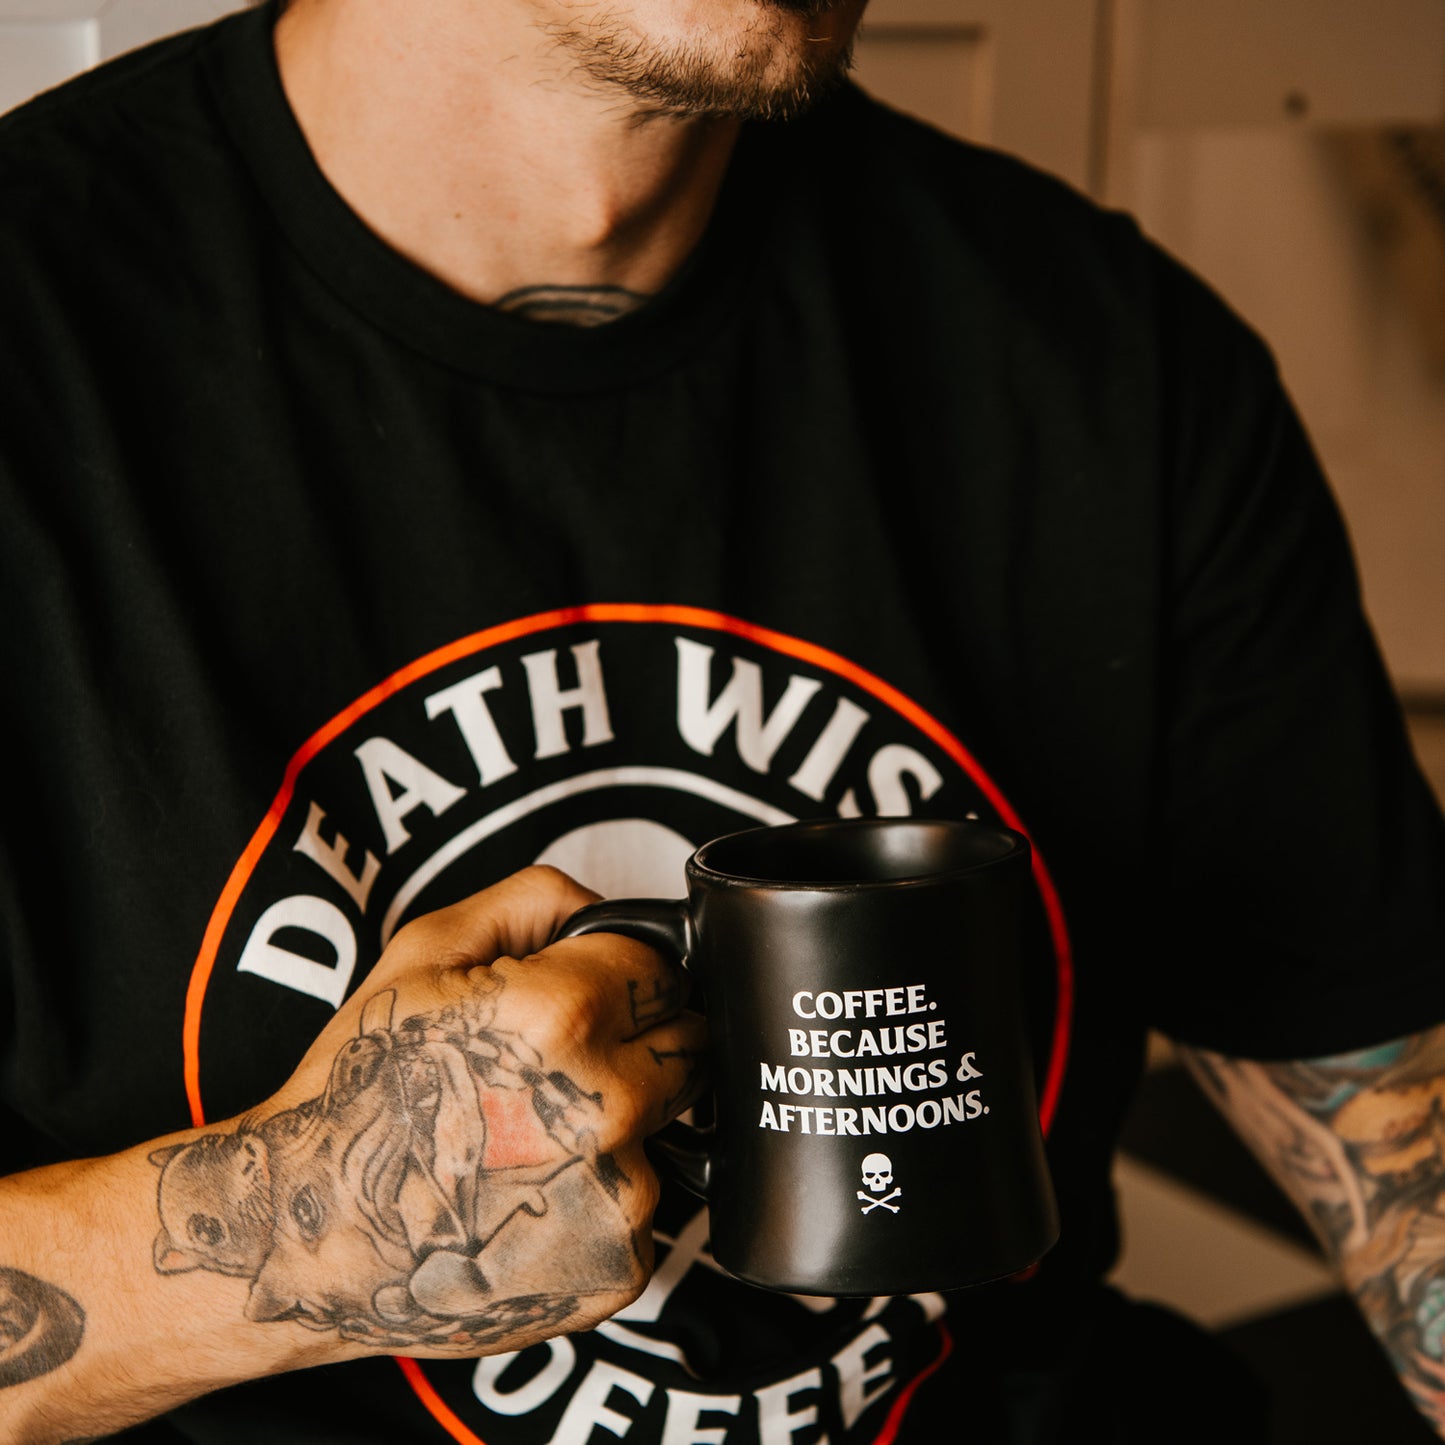 Holding the Death Wish Coffee Morning and Afternoon Mug 